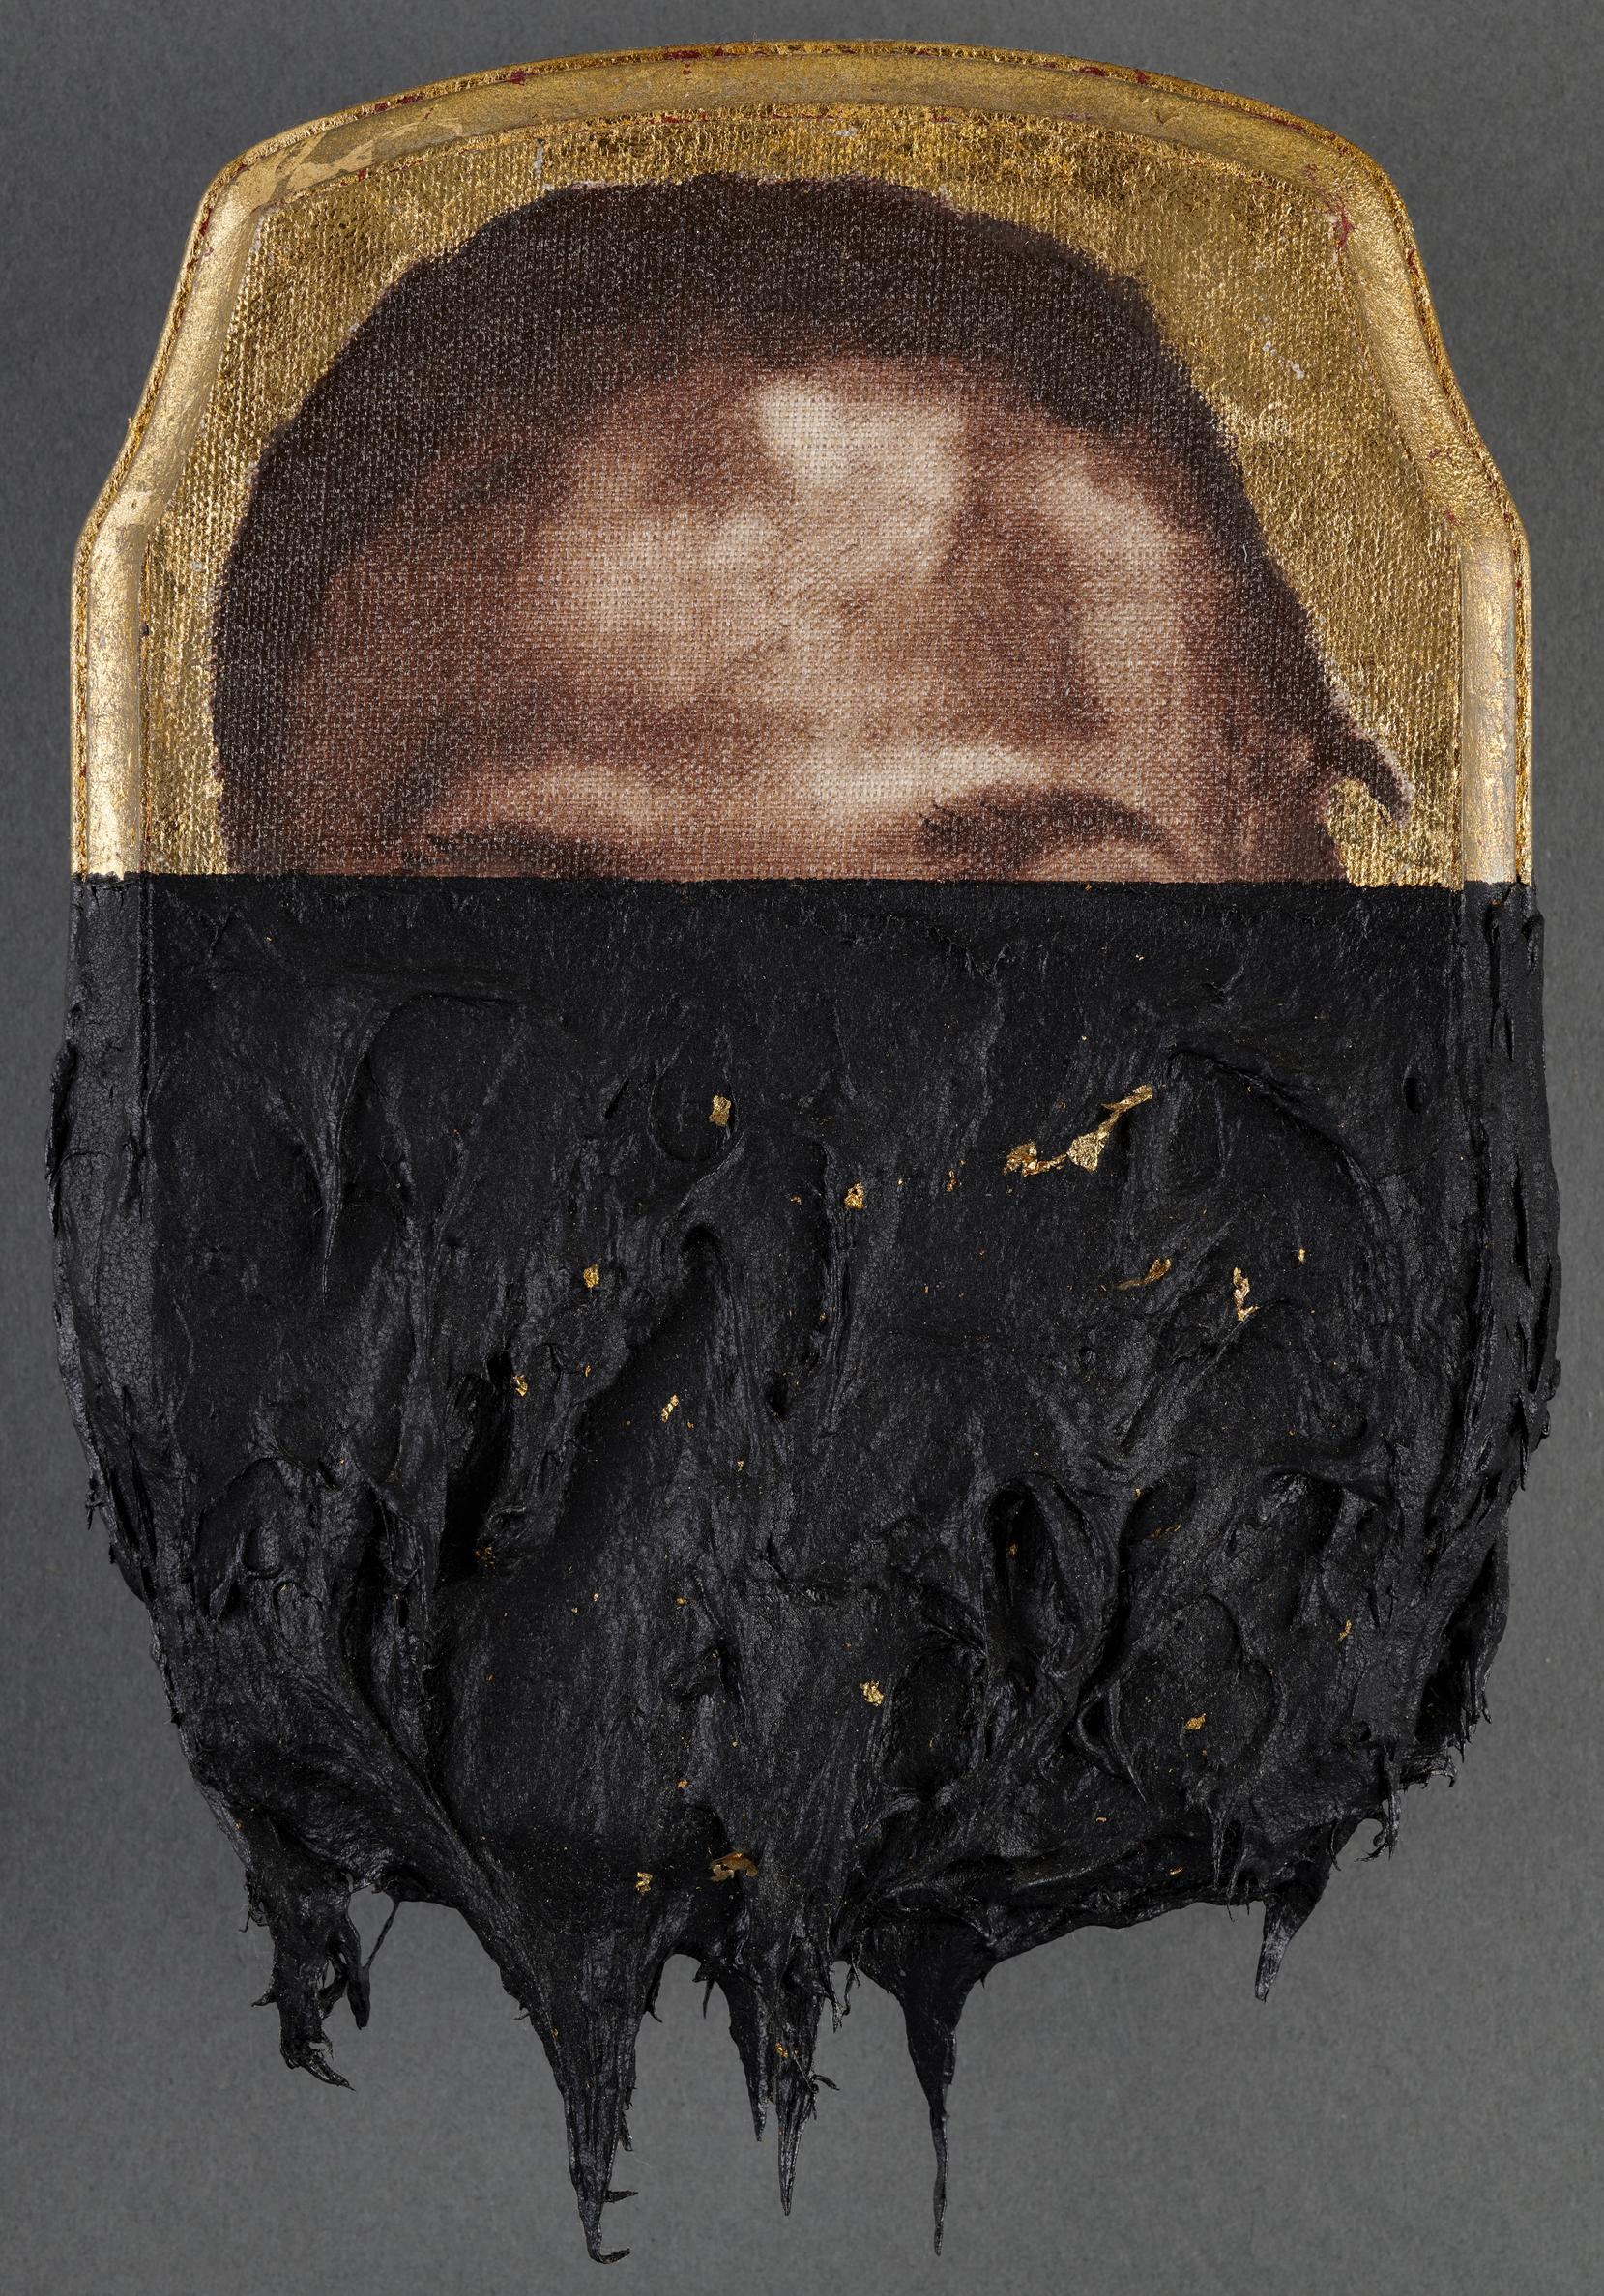 Titus Kaphar, Jerome XXVII, 2014. Oil, tar, and gold leaf on panel. 25.4 x 17.8 x 2.5 cm (10 x 7 x 1 in.). Tracey and Phillip Riese.